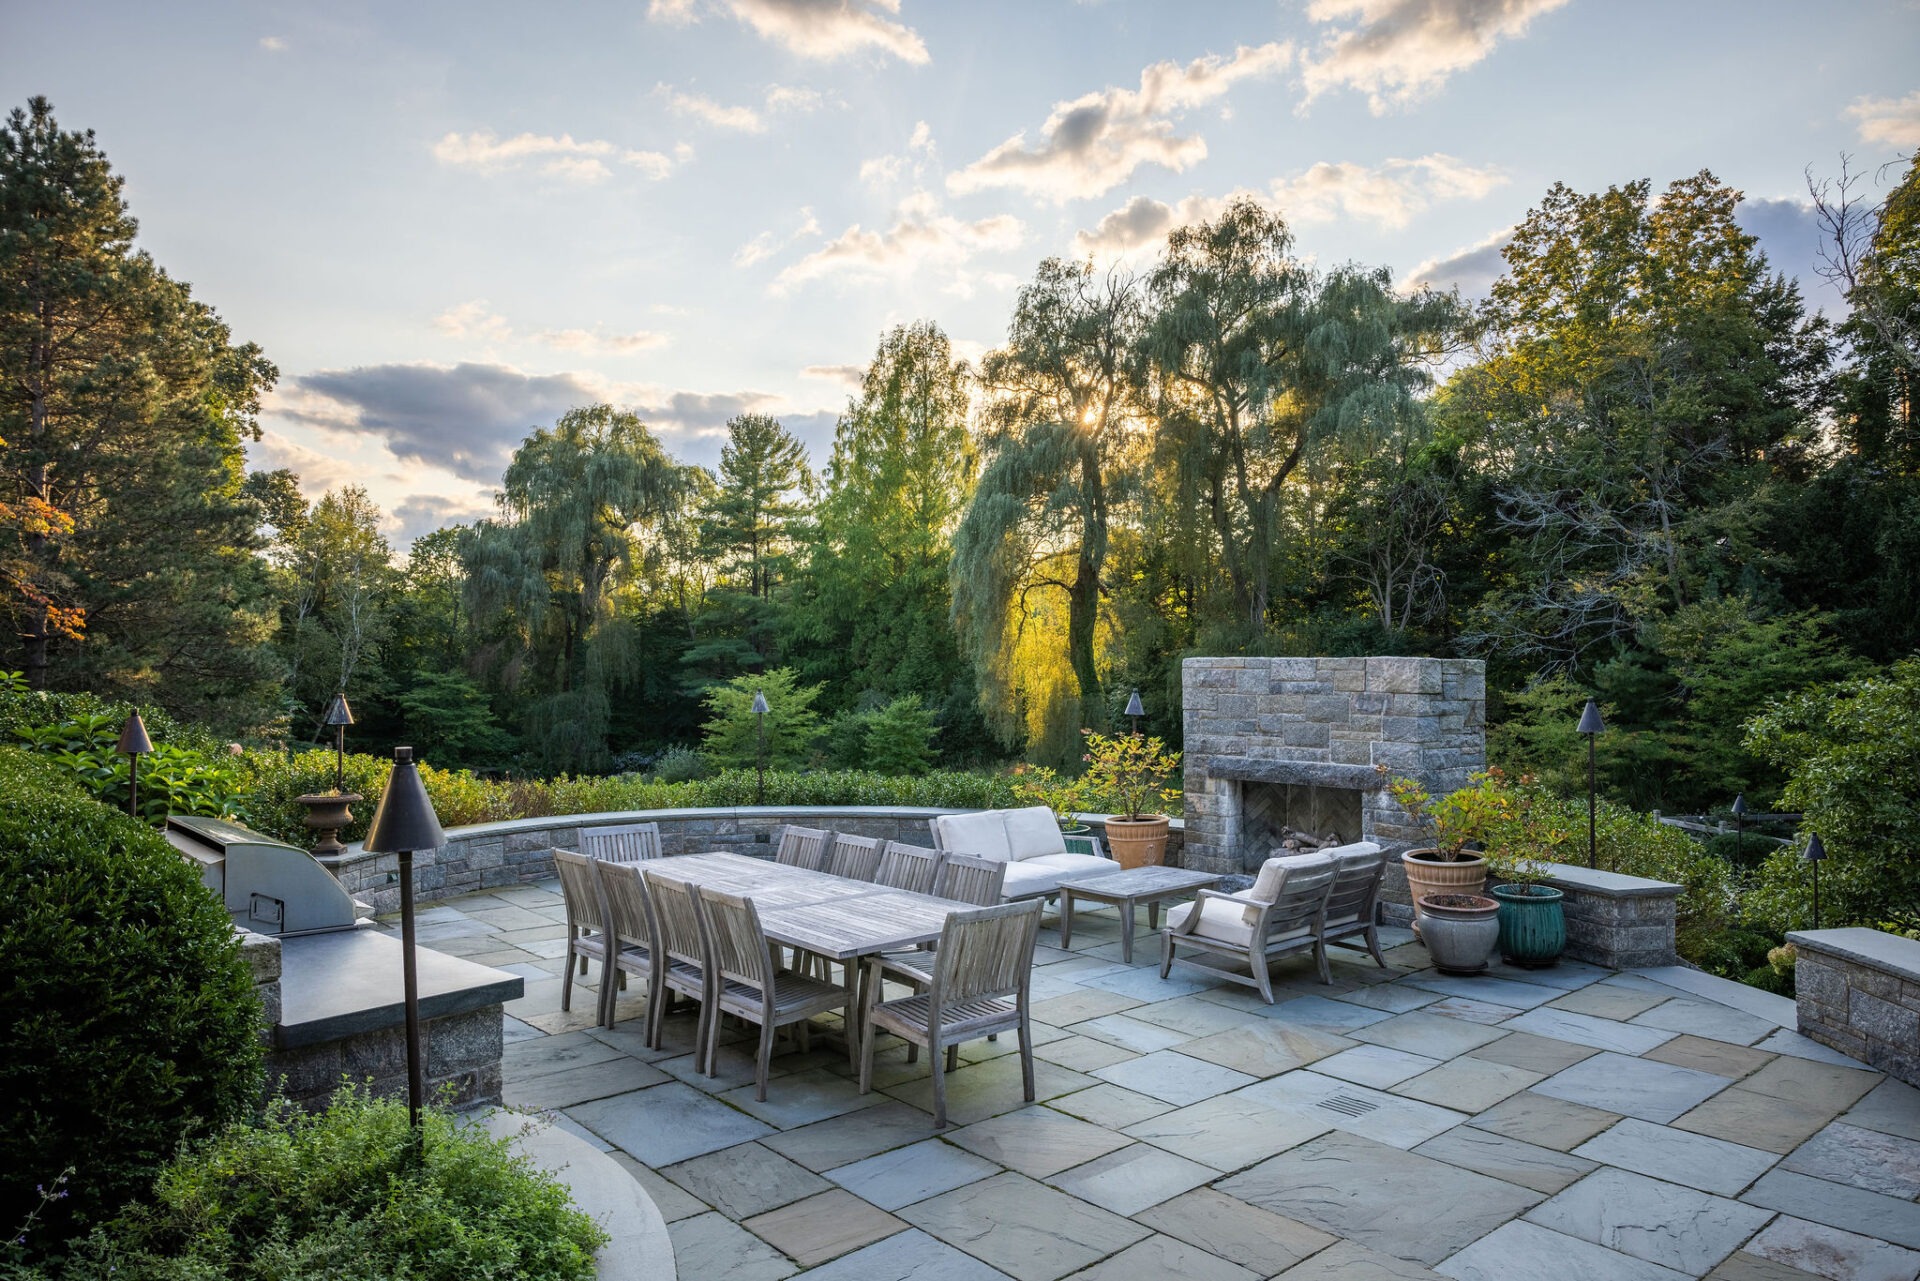 An elegant outdoor patio with a dining table, chairs, a lounging area, and a stone fireplace, set against a backdrop of lush trees and sunset.